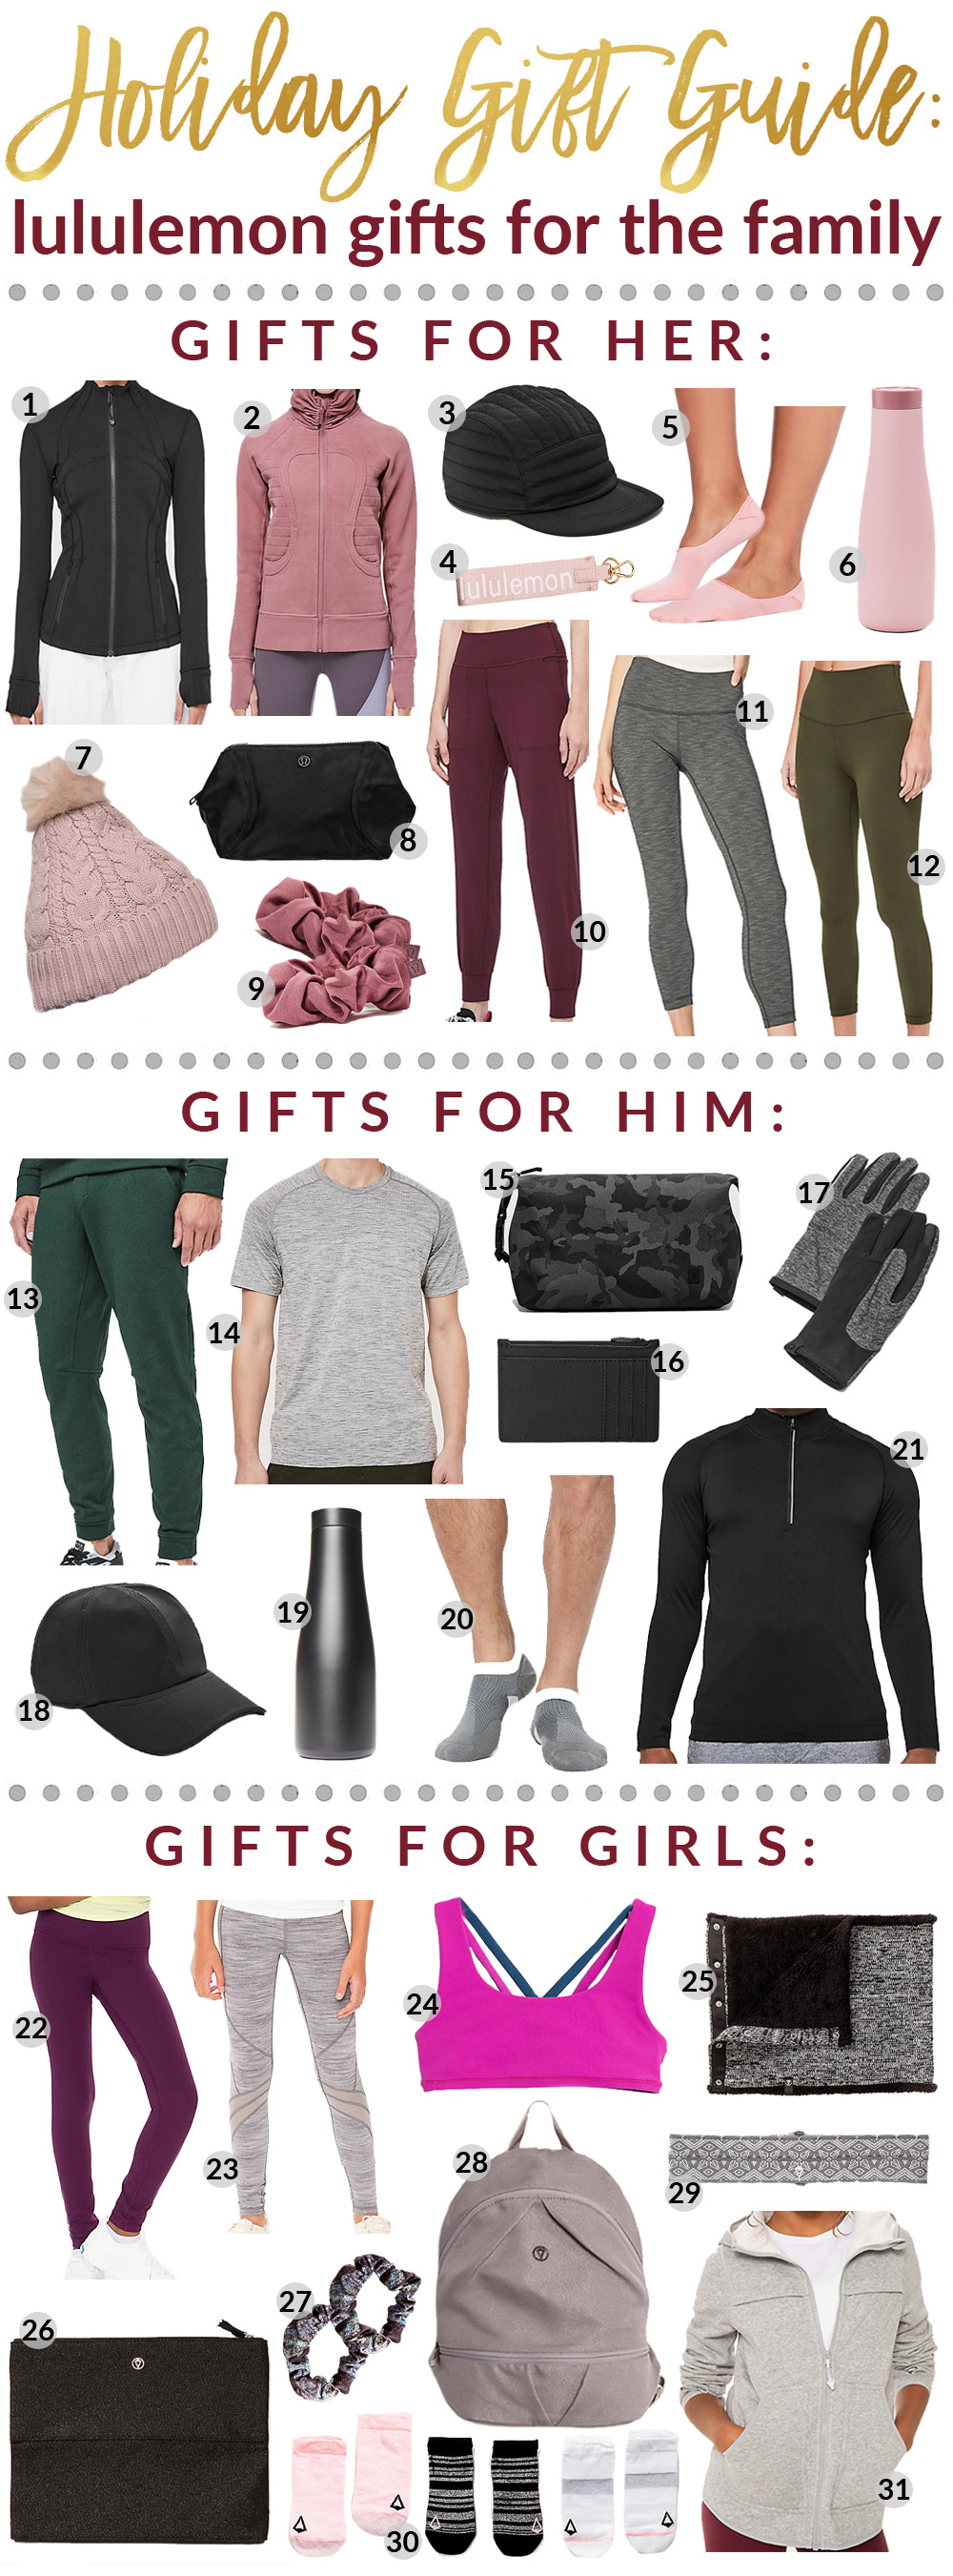 lululemon gifts for her